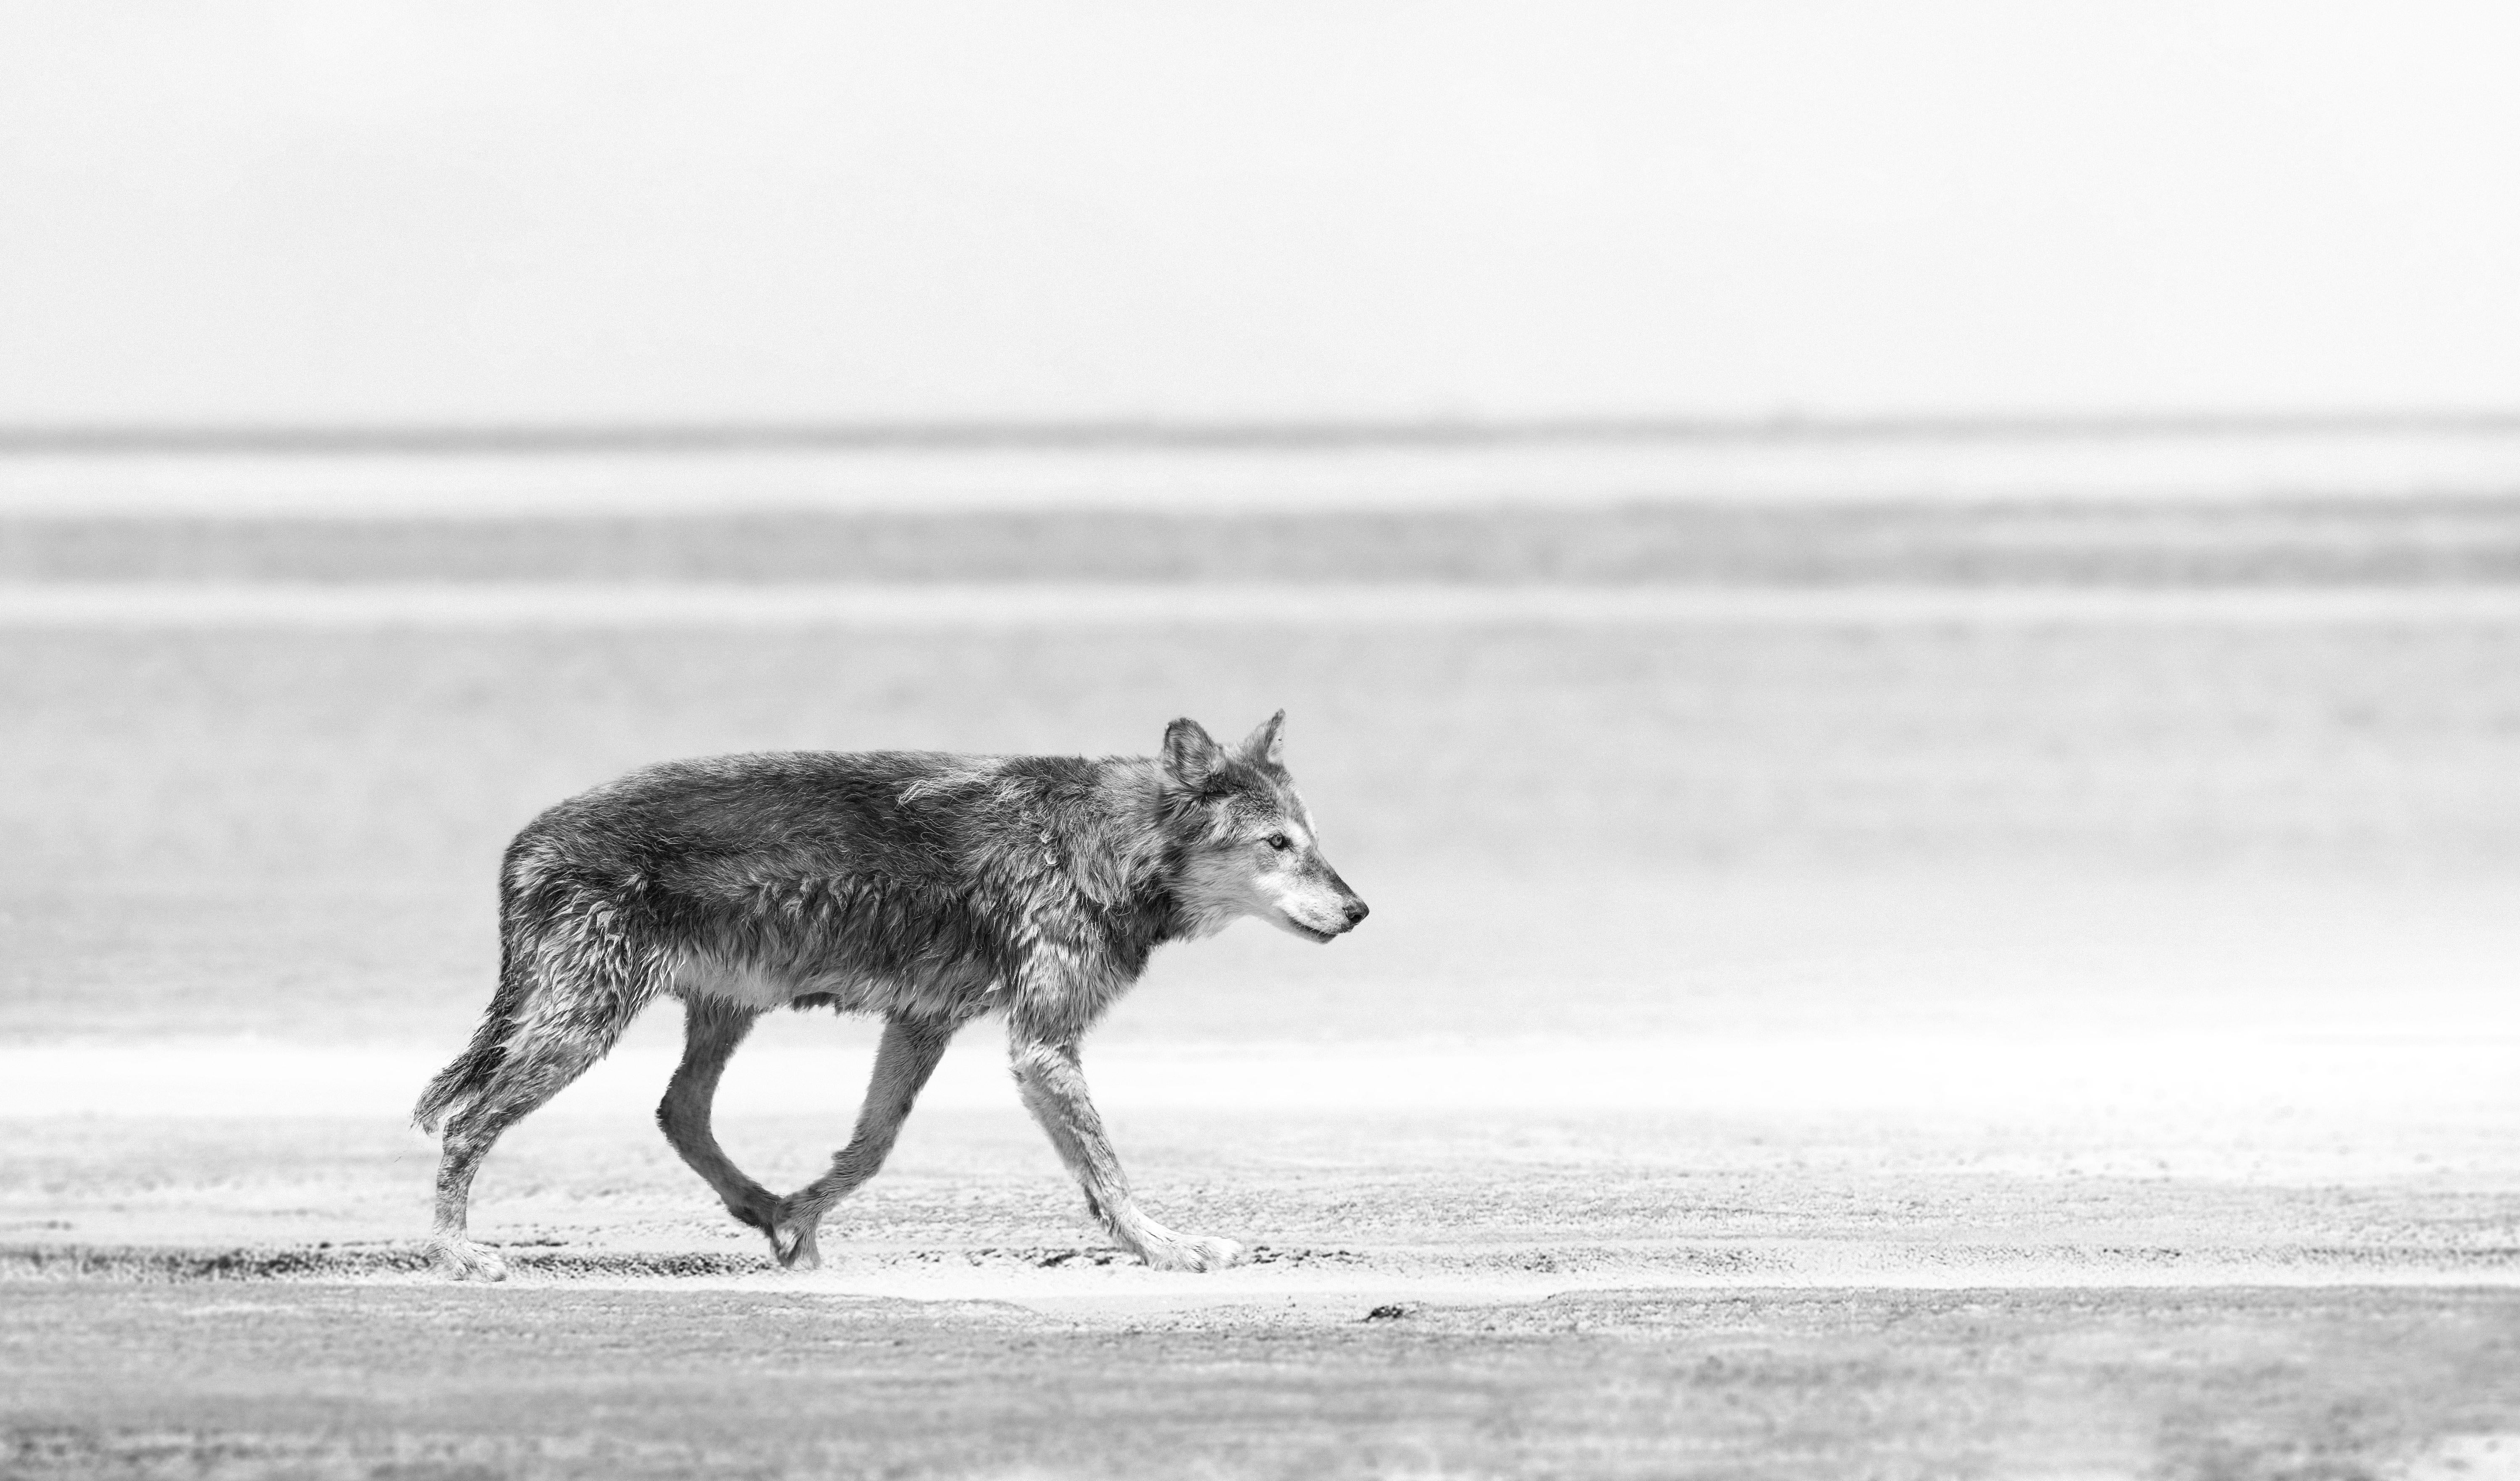 Shane Russeck Animal Print -  "Sea Wolf" 30x60, Black and White Wolf, Wolves, Photography Photograph Art